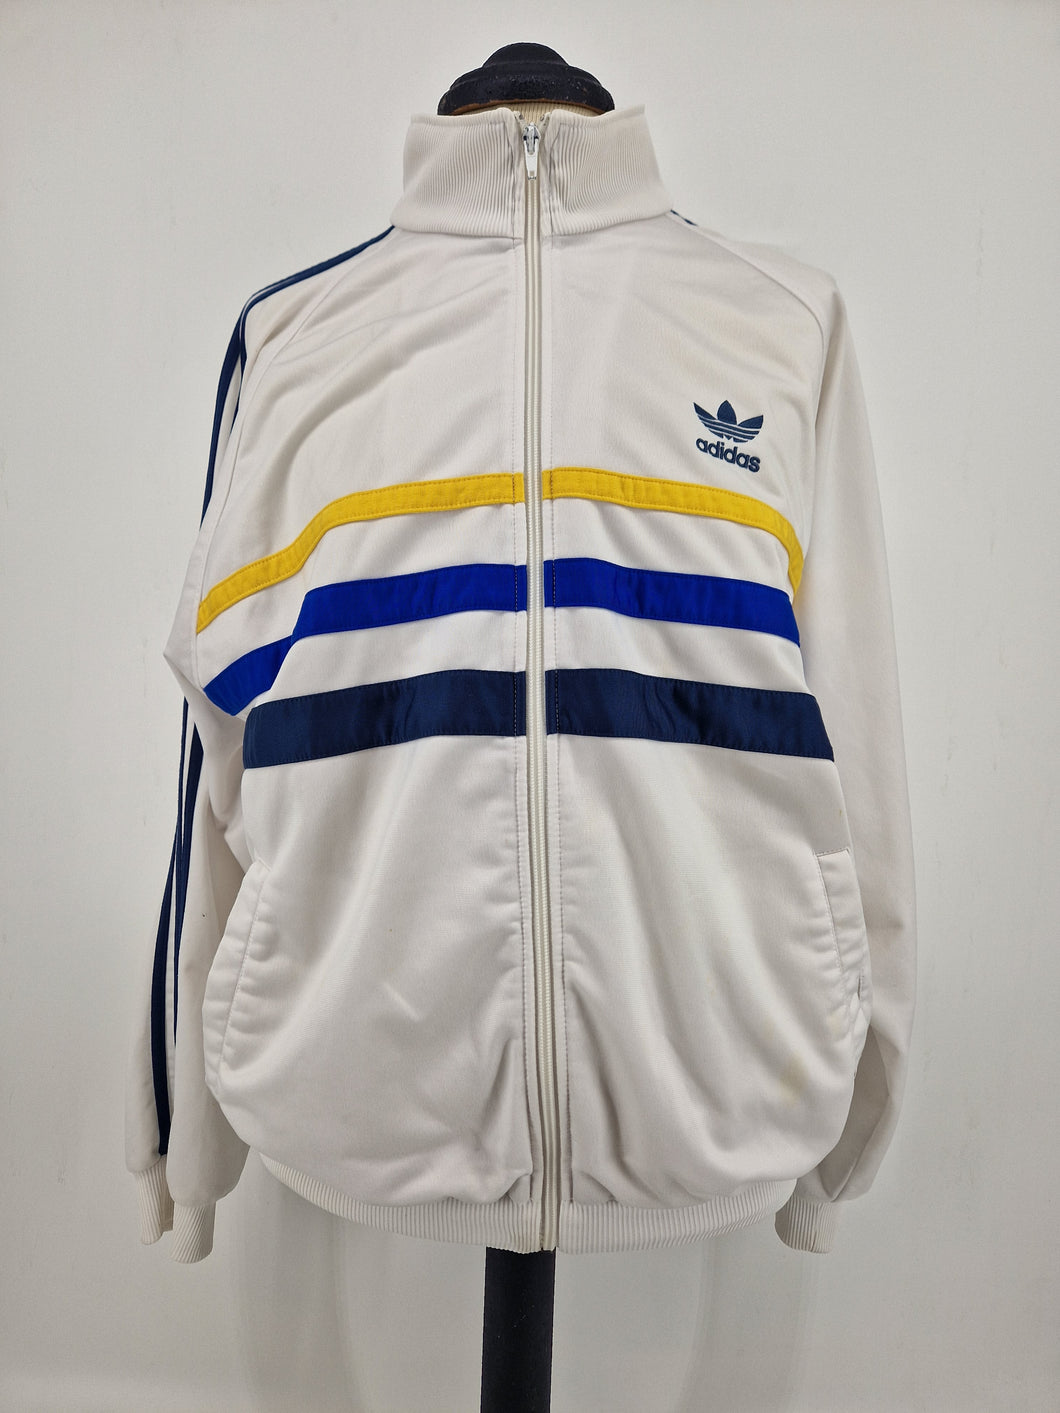 1993 adidas Originals First Track Top L White Yellow Blue